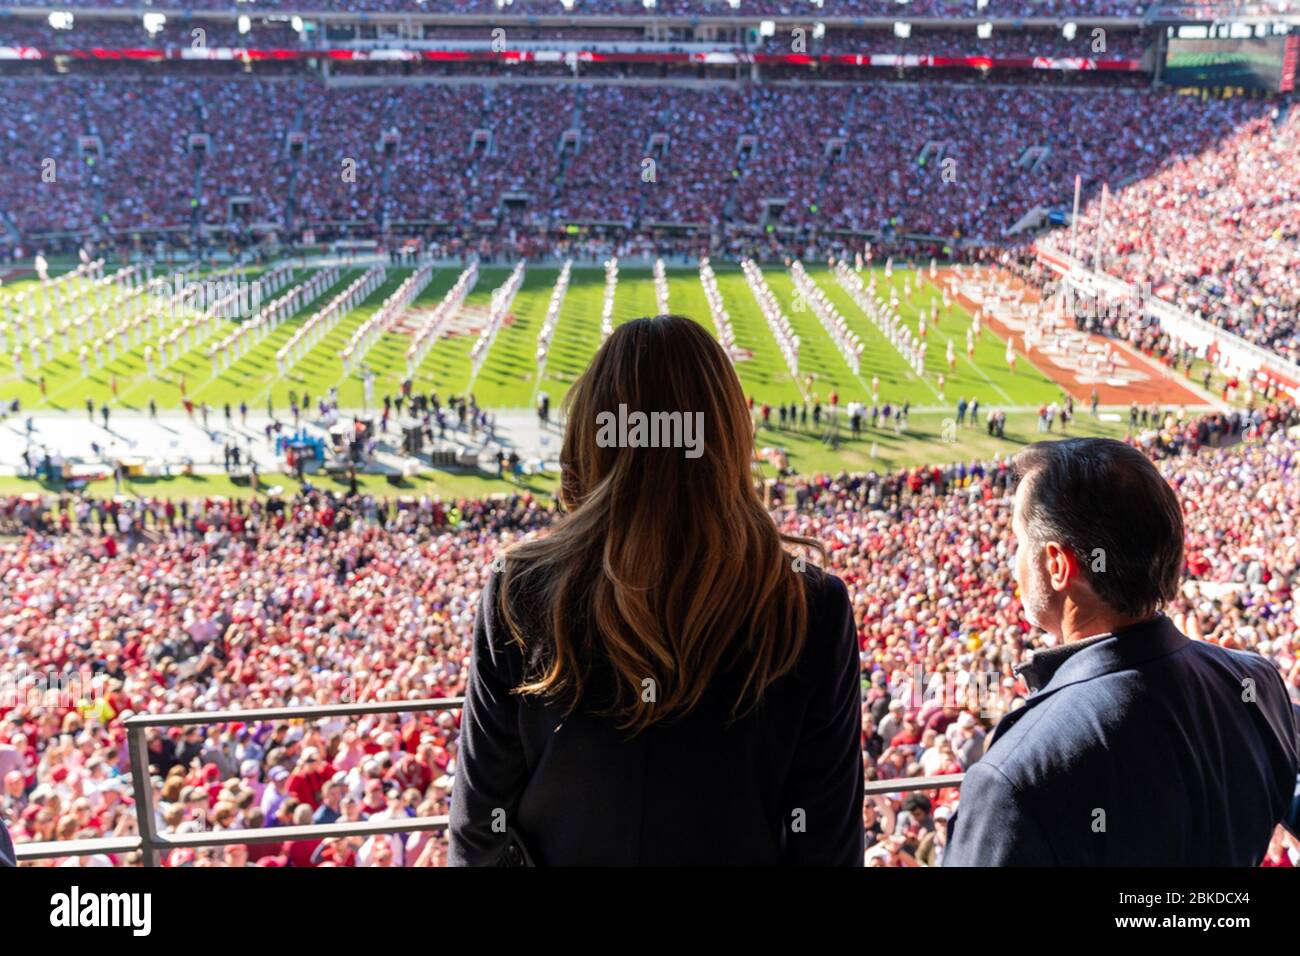 First Lady Melania Trump watches the action on the field at Bryant-Denny Stadium Saturday, Nov. 9, 2019, while attending the University of Alabama -Louisiana State University football game in Tuscaloosa, Ala. President Trump and First Lady Melania Trump in Alabama Stock Photo